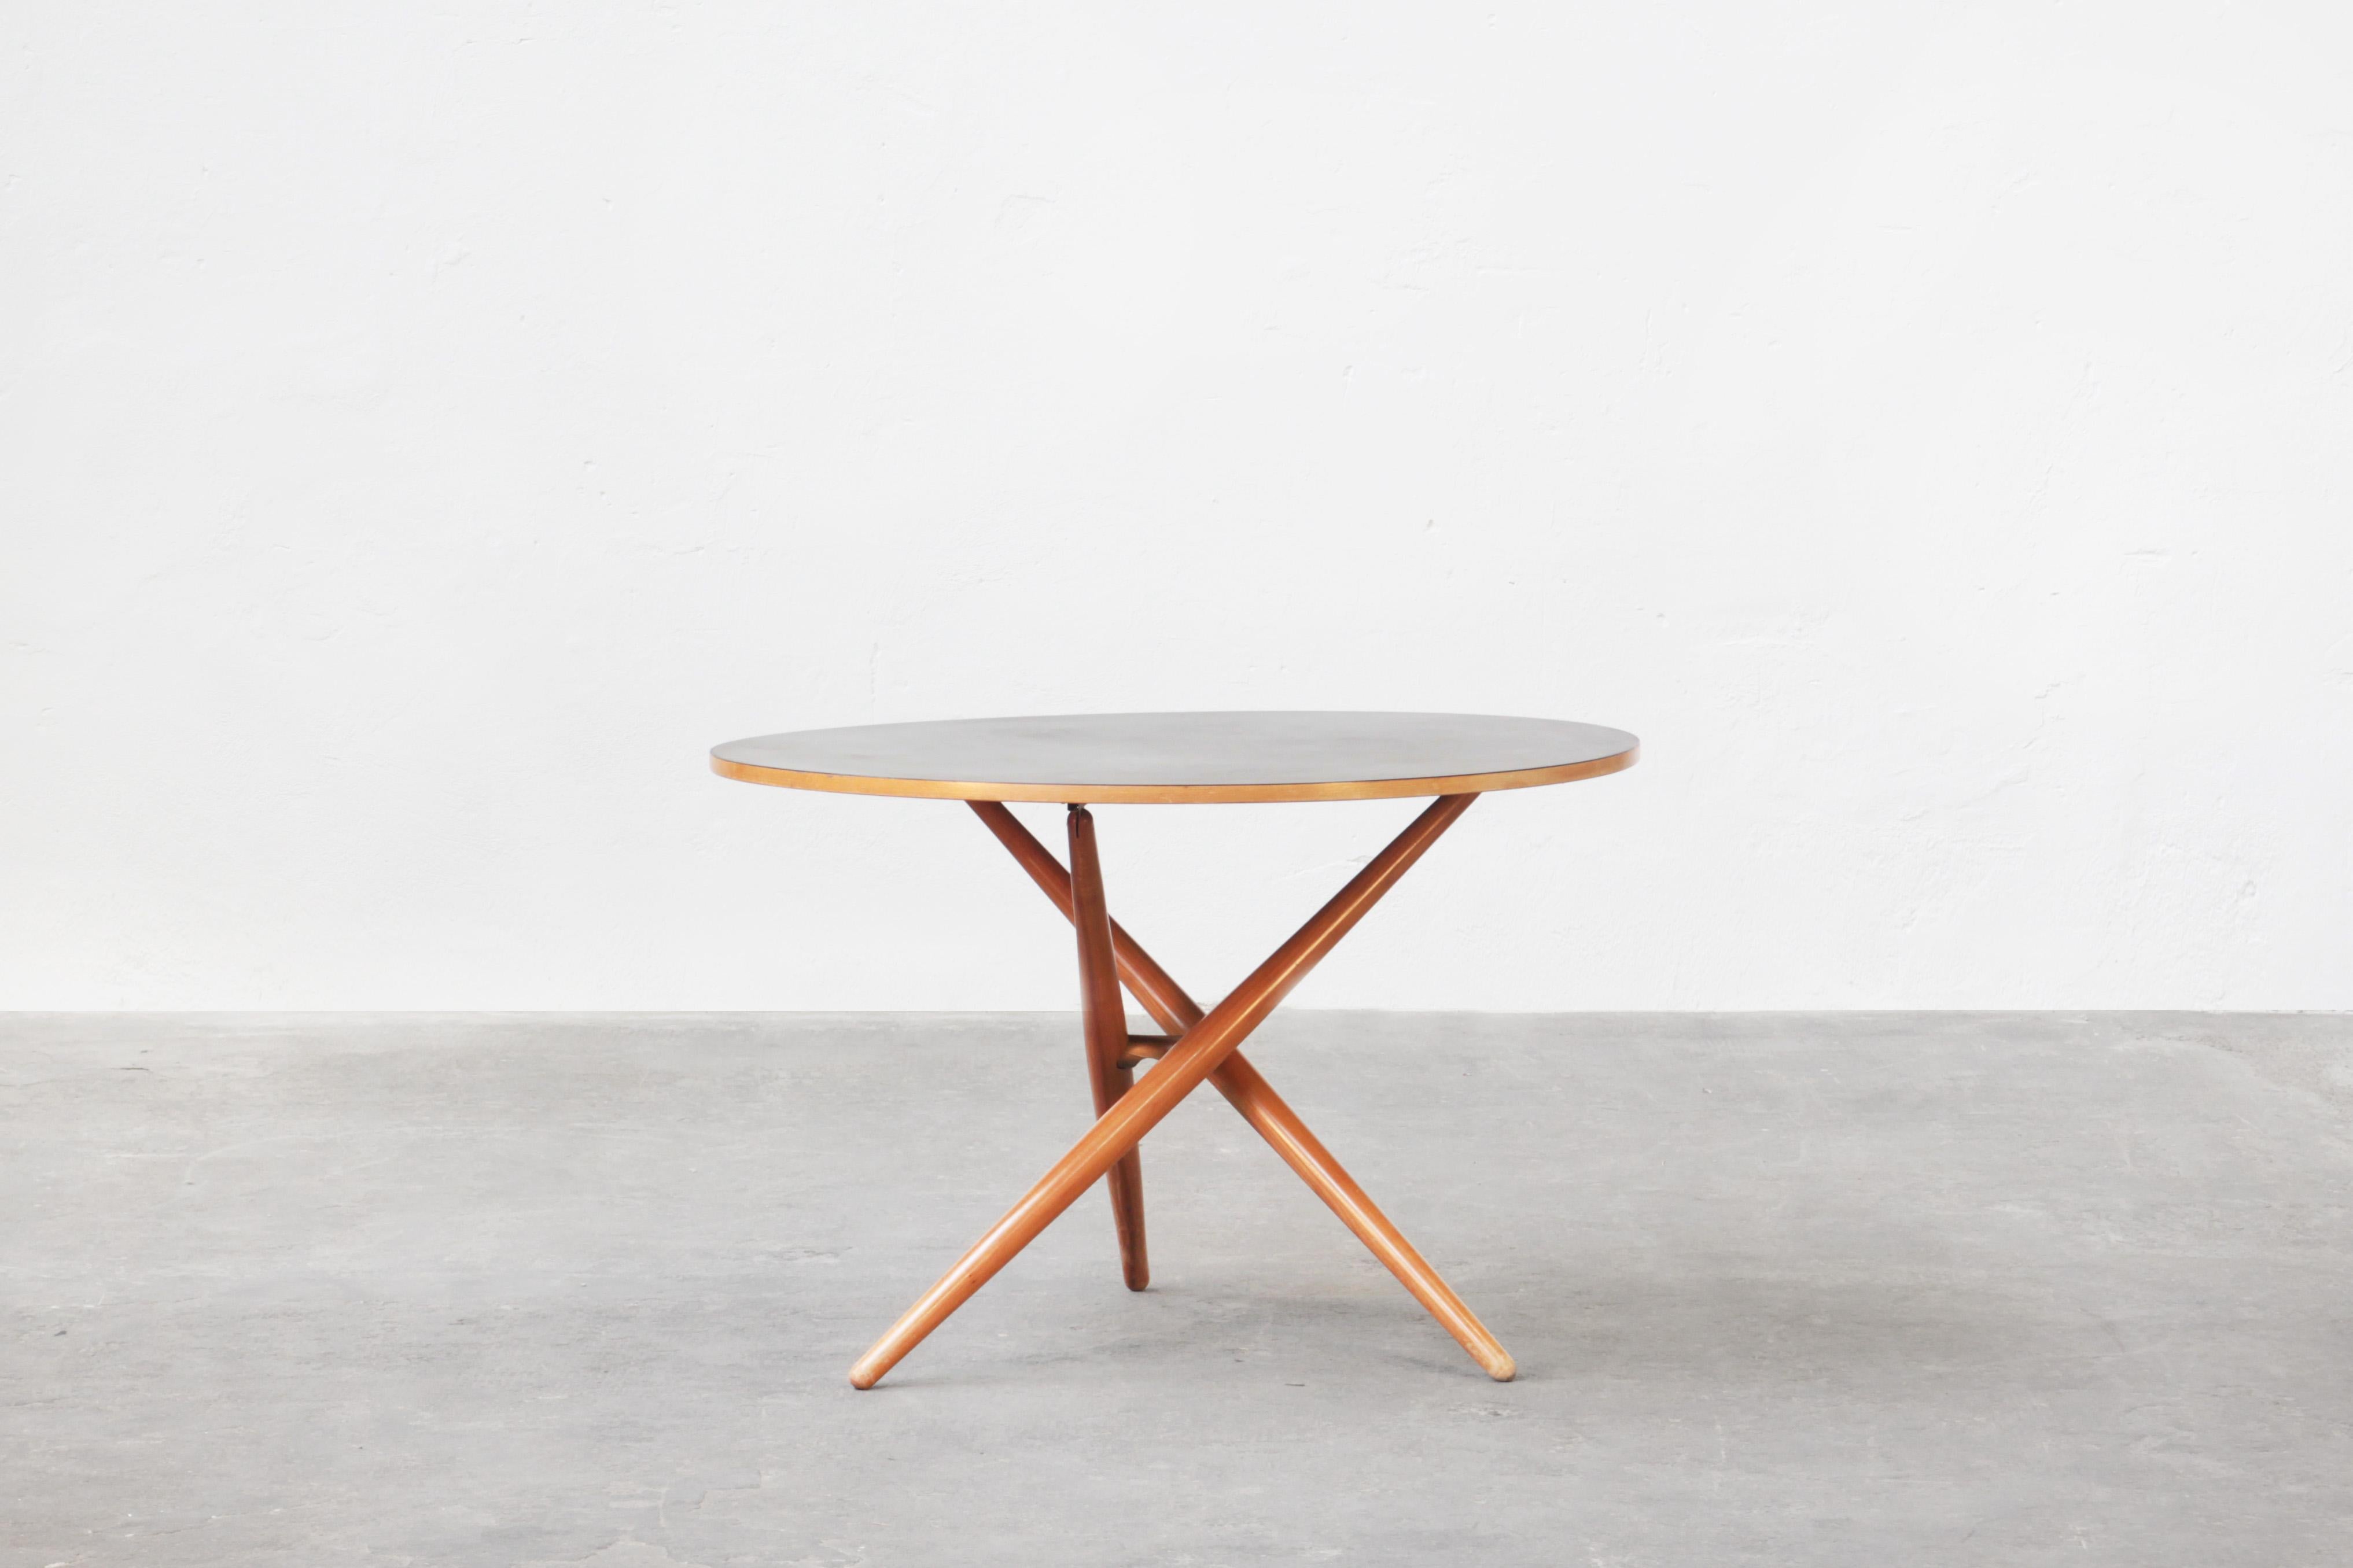 An early height-adjustable oak table designed by Jürg Bally for Wohnhilfe, Switzerland, 1951. 
Can be used both as a dining table and as a coffee table.
The black Formica top is still in very good condition and rests on three crossed cherry wood